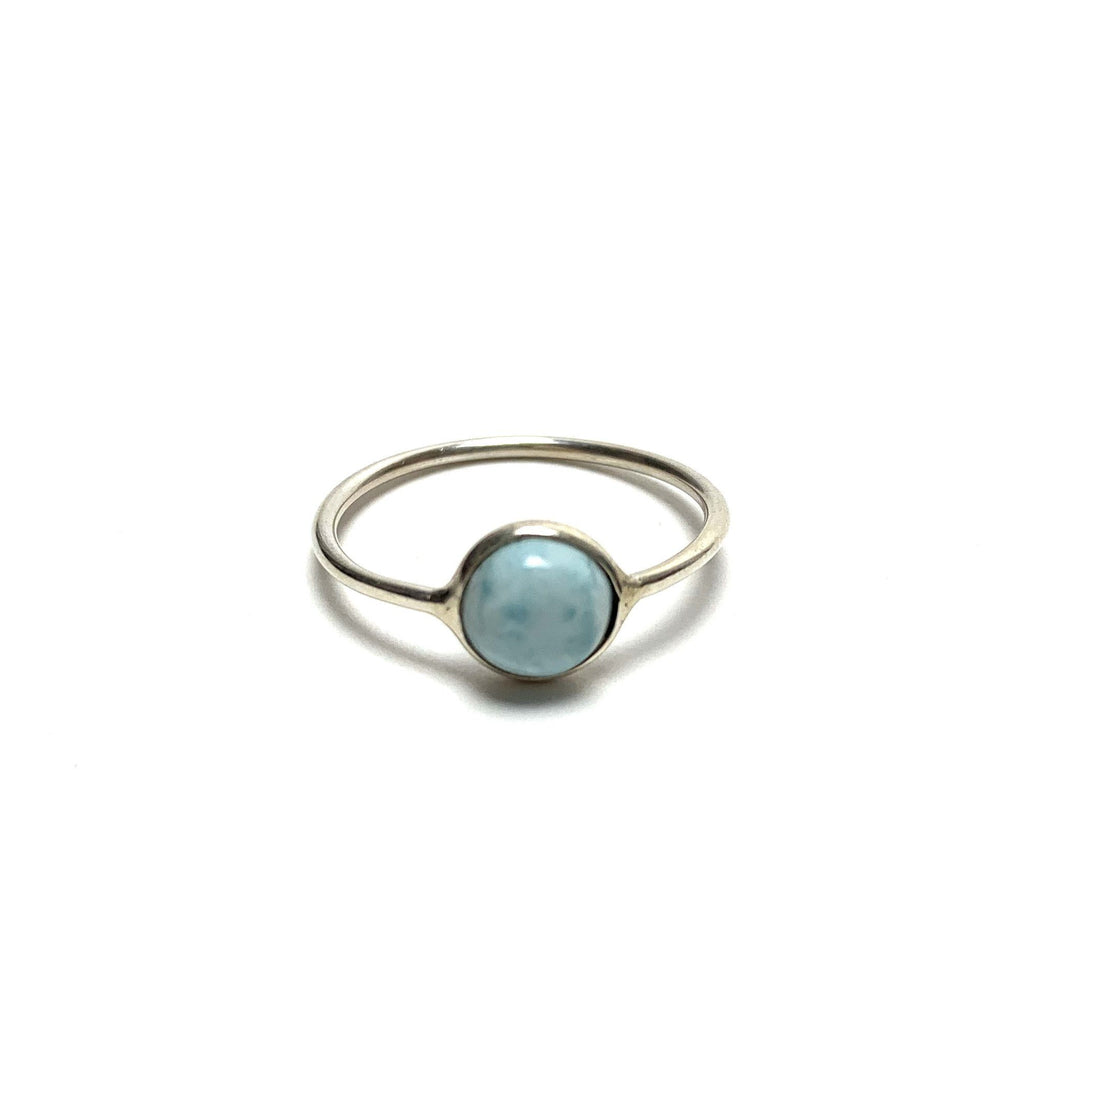 Larimar Silver Ring Rings Crystals A. $18.00 Size 5.5 